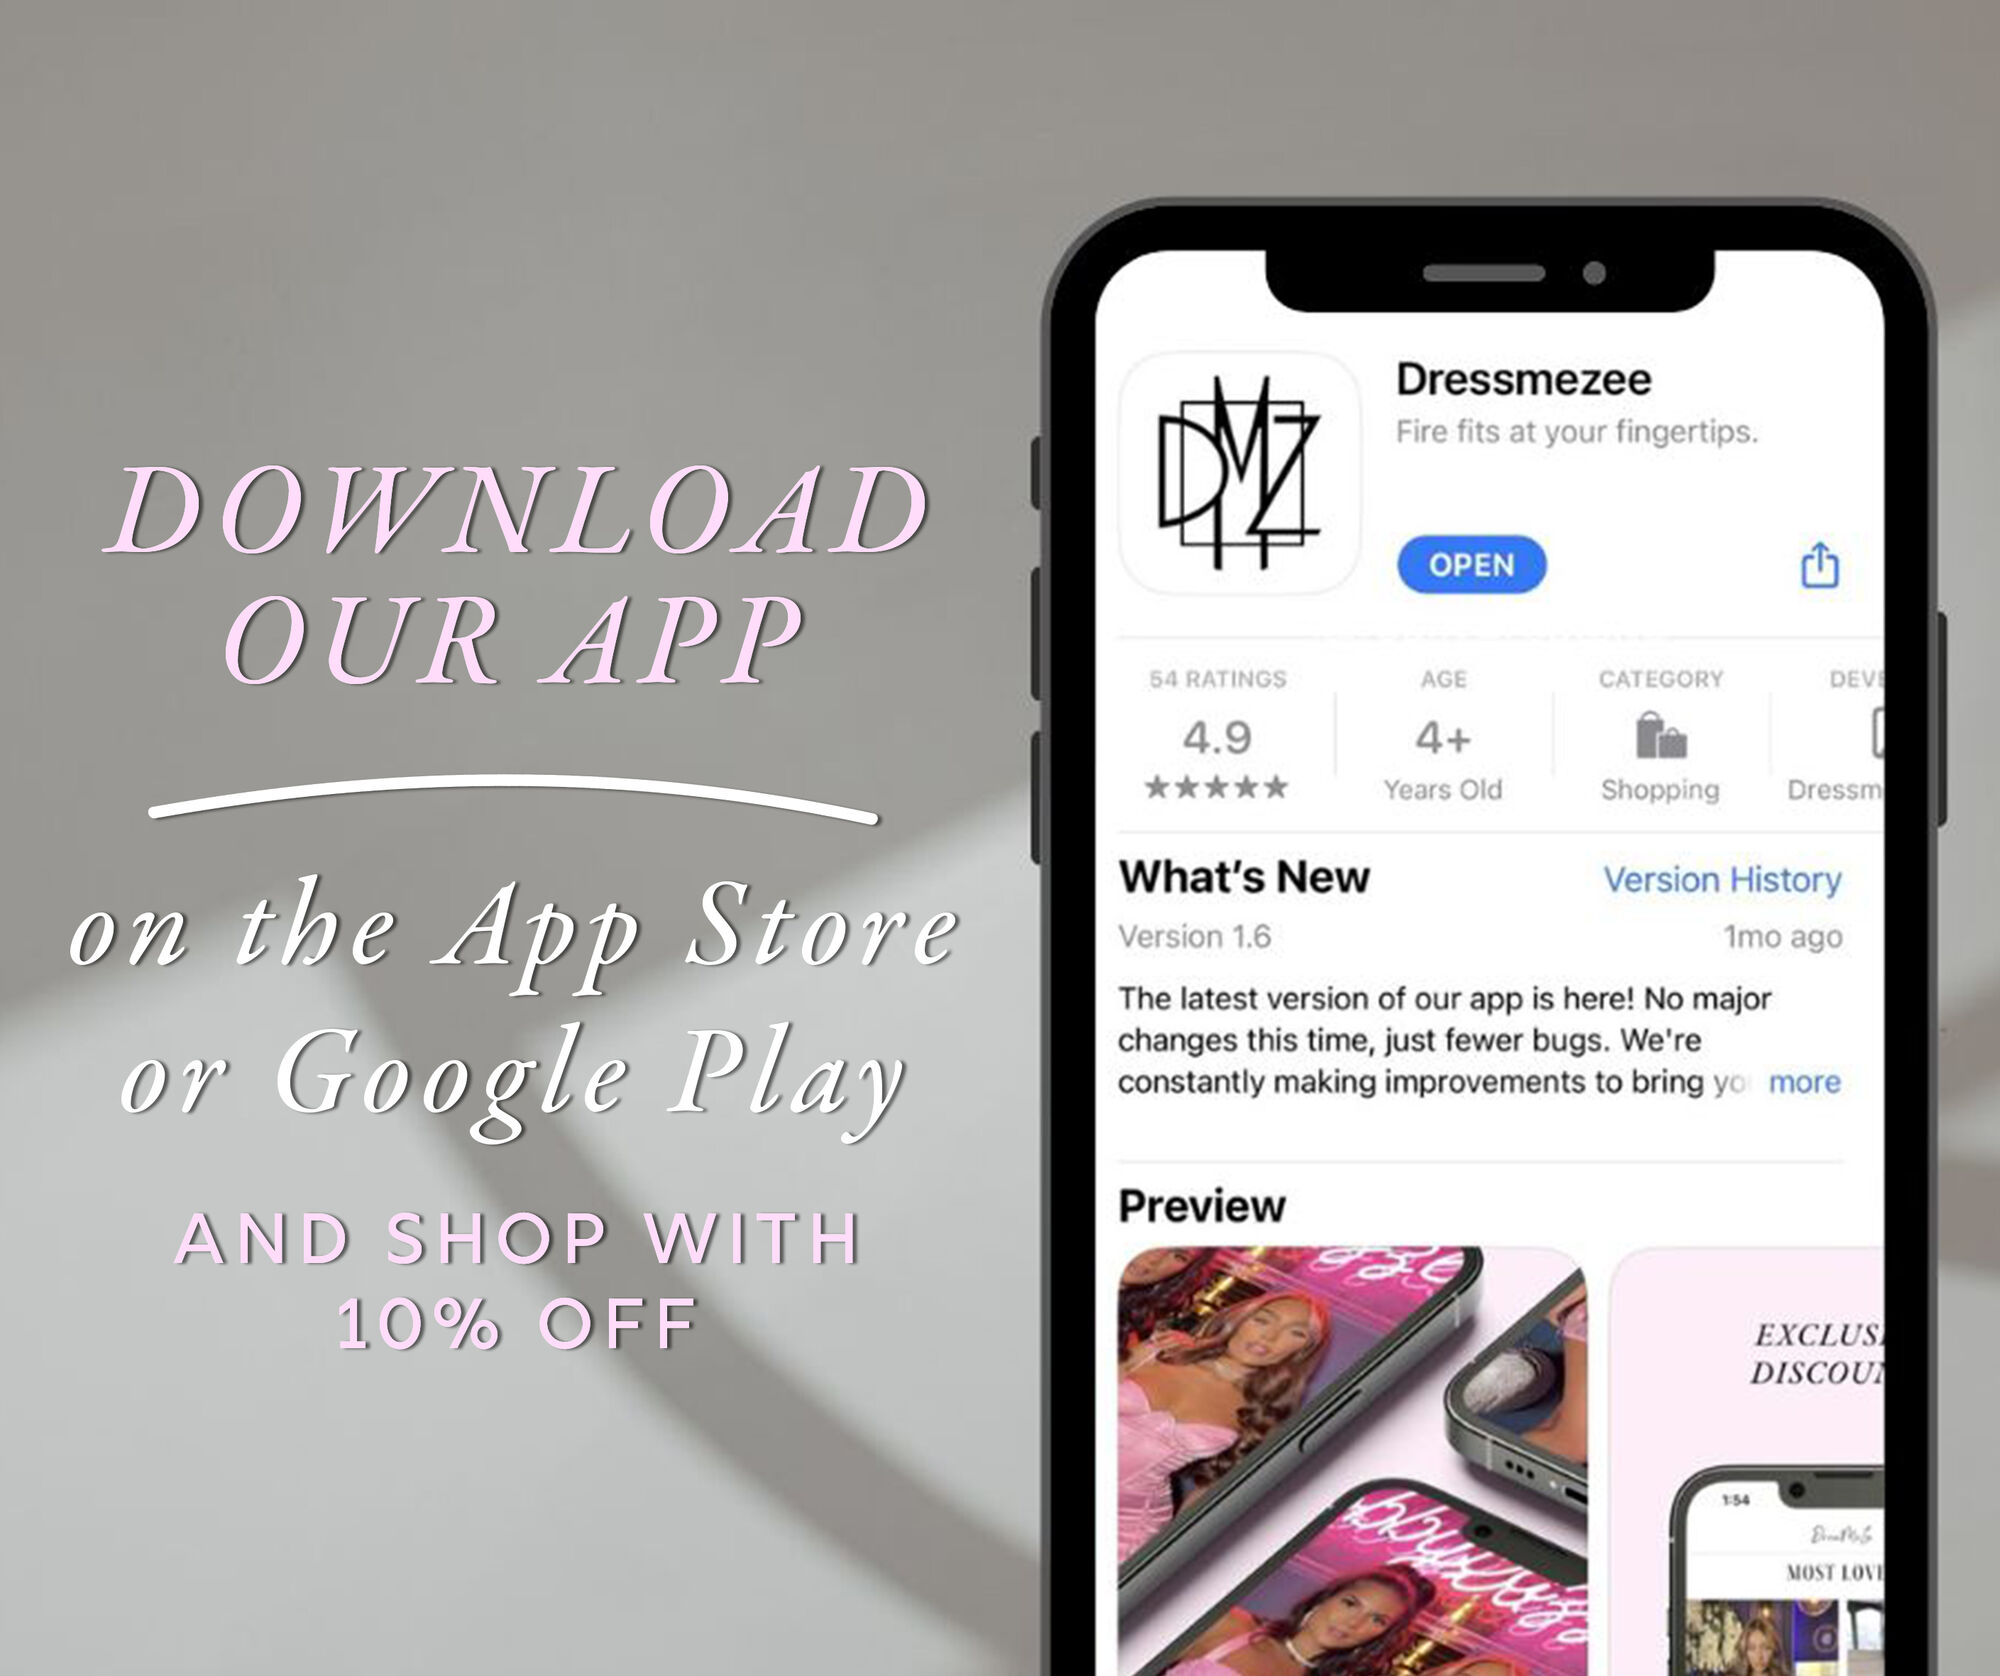 DOWNILOAD OUR APP Dressmezee Fire fits at your fingertips. pping 4.9 %% Kok ok Years Ol St 10 What's New Version History Version 1.6 1mo ago The latest version of our app is here! No major changes this time, just fewer bugs. We're constantly making improvements to bring y more Preview EXCLUS. 